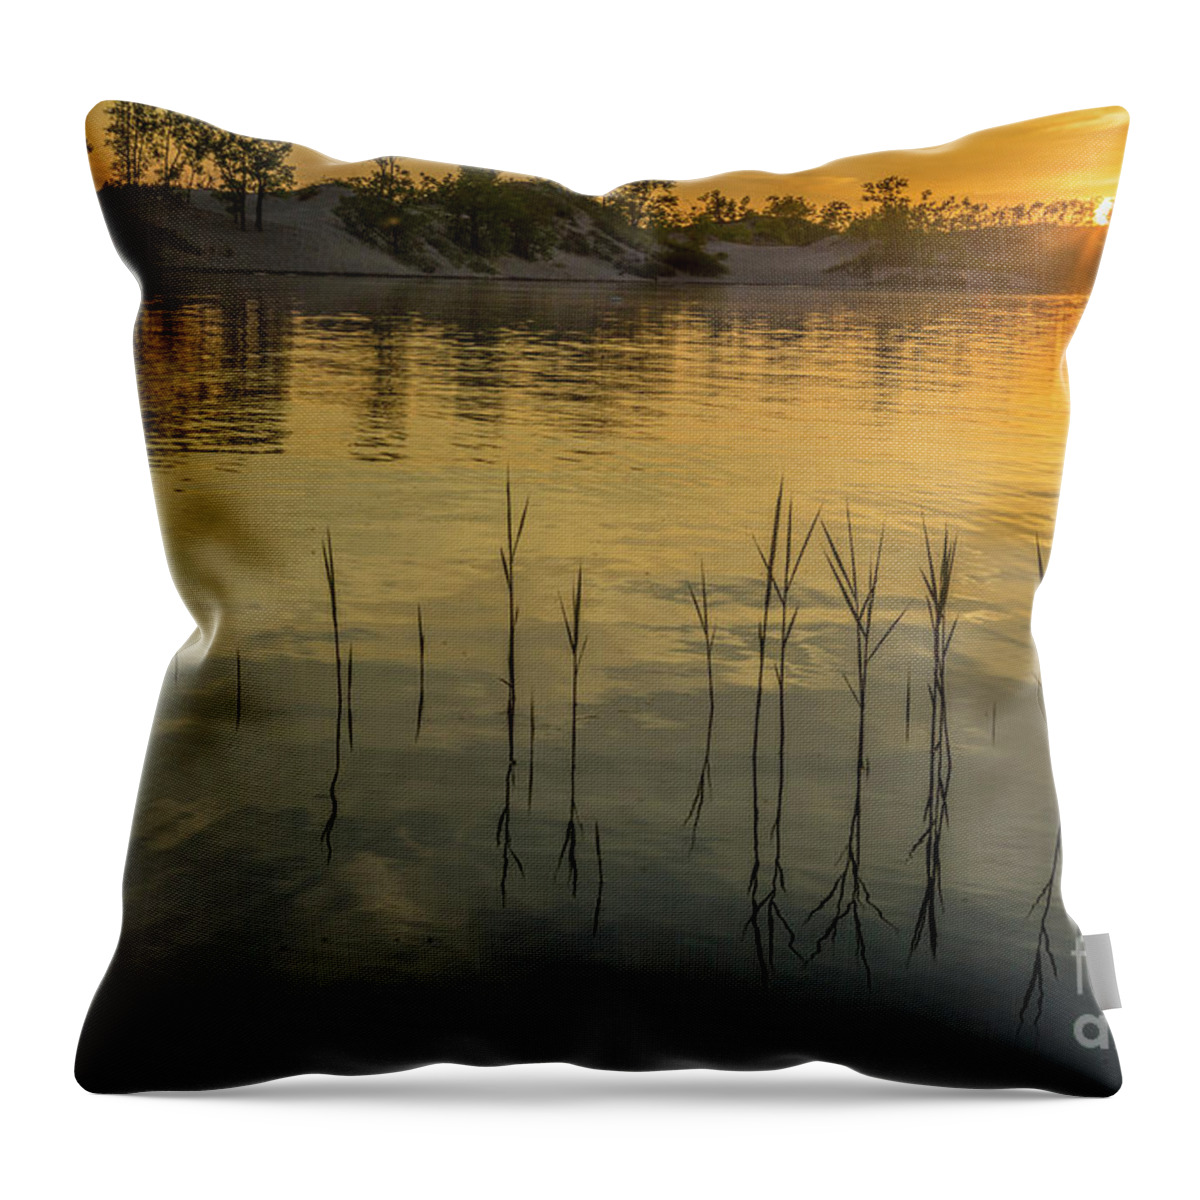 Evening Throw Pillow featuring the photograph Sandbanks Sunset by Roger Monahan